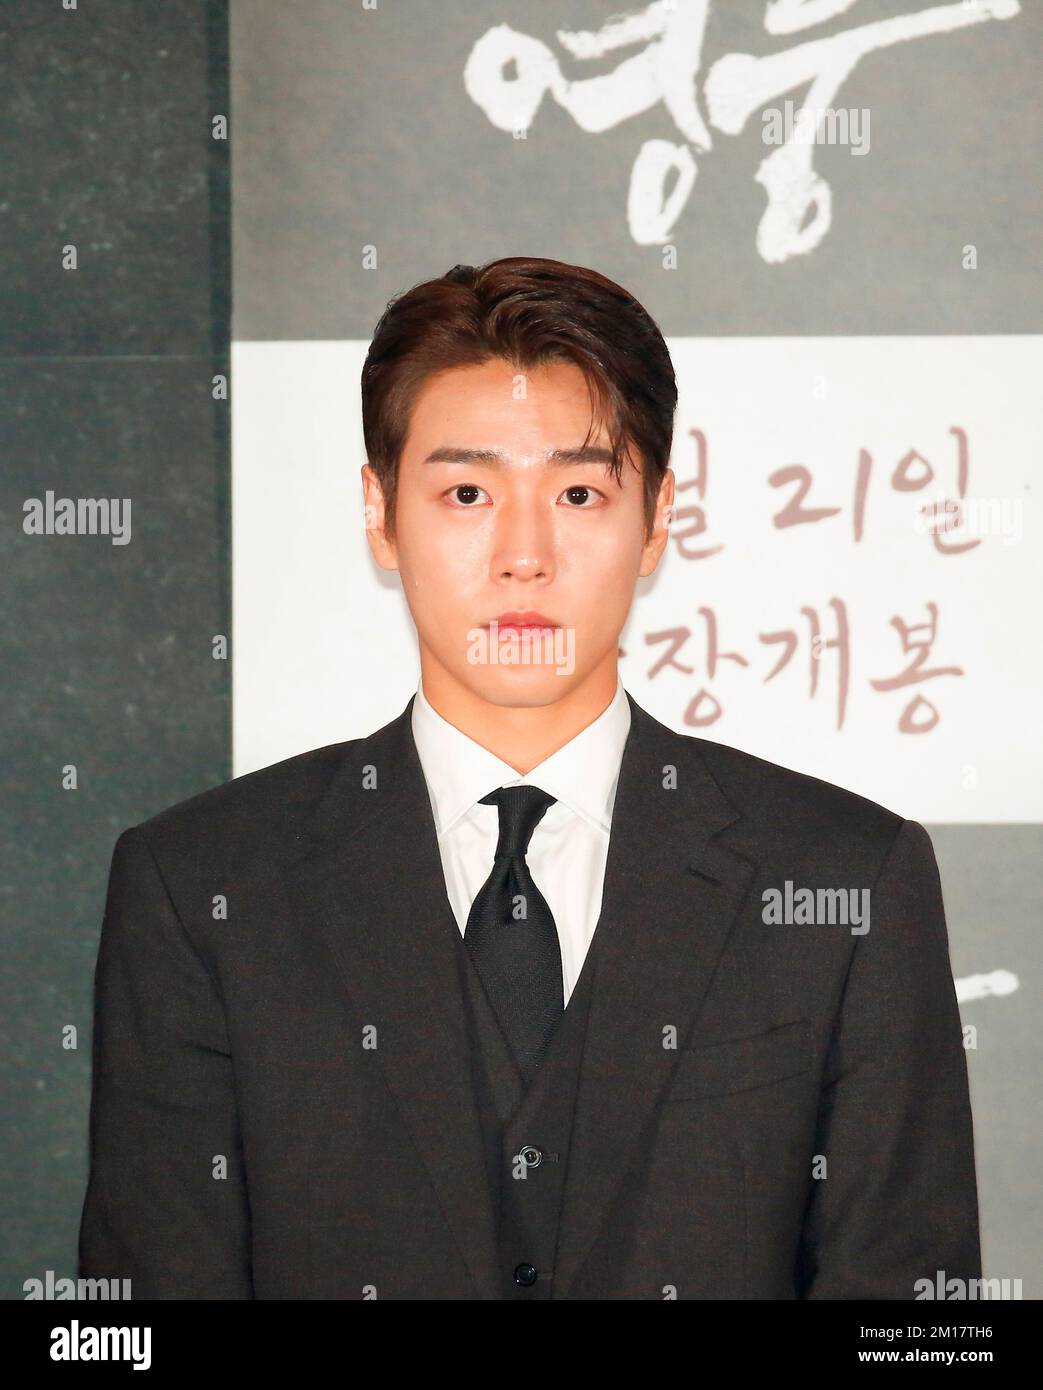 Lee Hyun-Woo, Dec 8, 2022 : South Korean actor Lee Hyun-Woo attends a press conference after a press preview of the movie "Hero" in Seoul, South Korea. The upcoming South Korean musical drama film is about Korean independence fighter Ahn Jung-Geun (1879-1910) who assassinated on October 26, 1909, Ito Hirobumi, Japan's first prime minister and resident-general of Korea at Harbin station in northern China. Ahn was executed at the age of 31 in March 1910. Japan colonised Korea from 1910 to 1945. Credit: Lee Jae-Won/AFLO/Alamy Live News Stock Photo